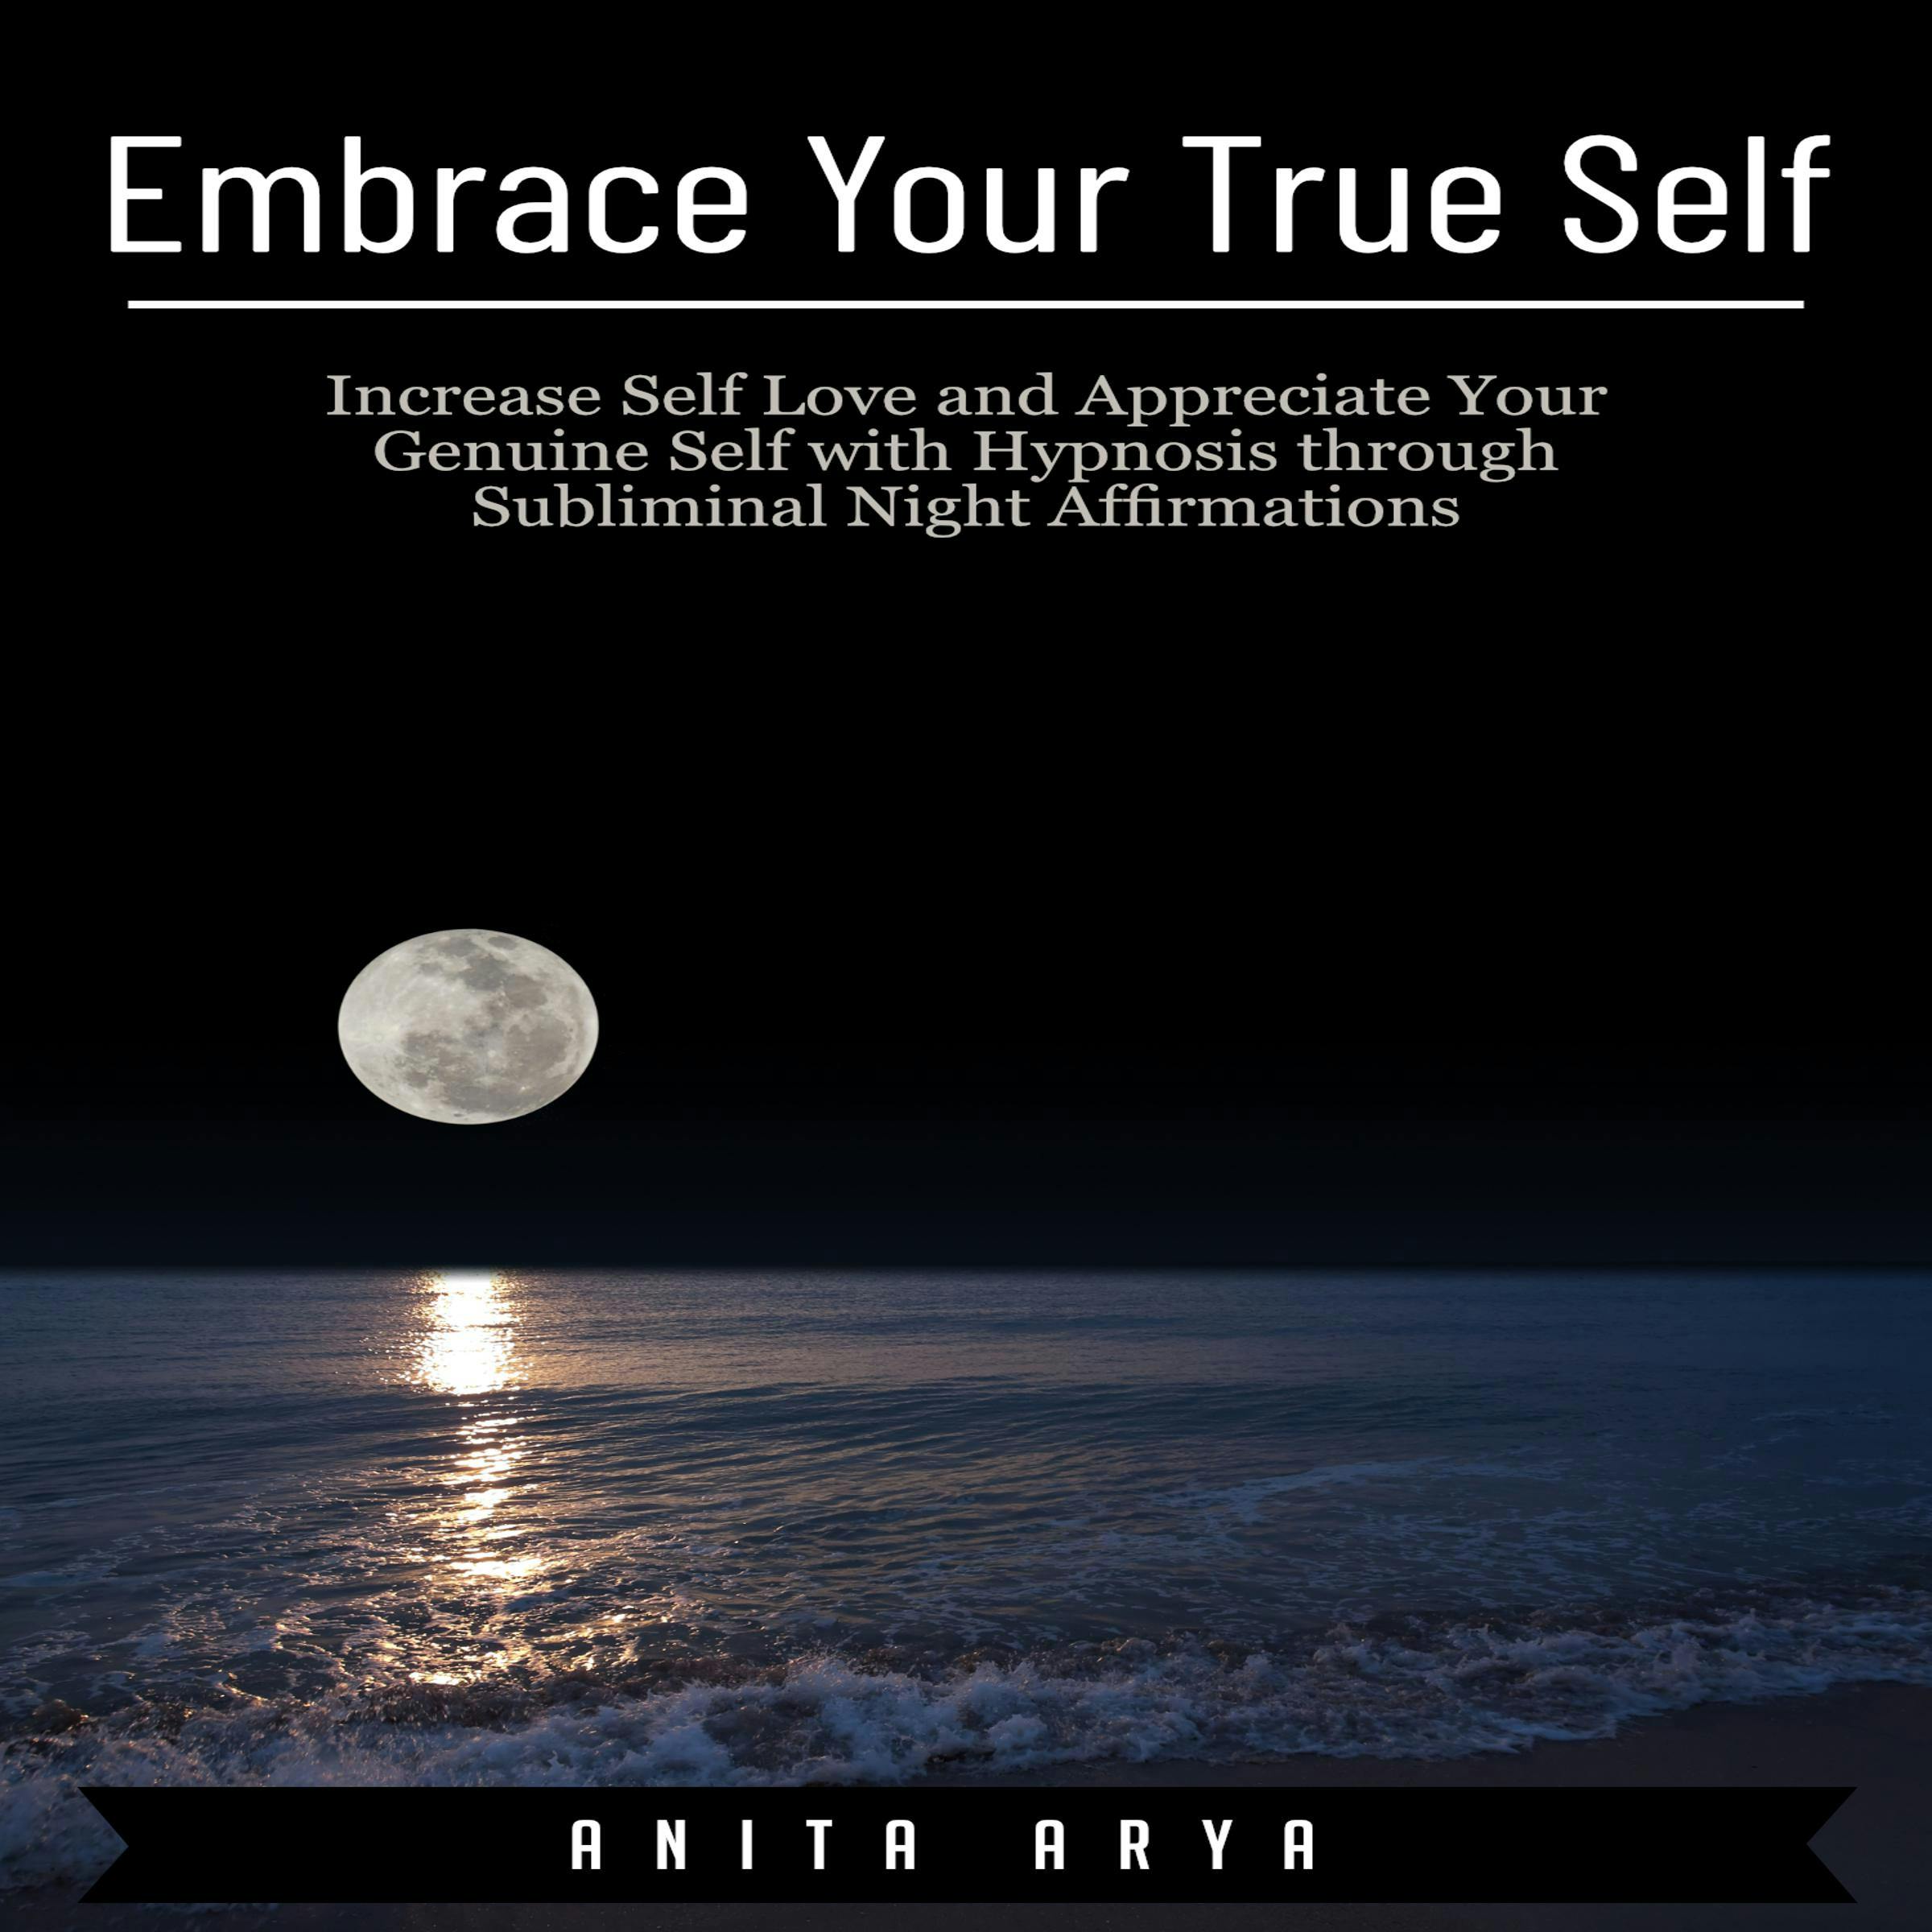 Embrace Your True Self: Increase Self Love and Appreciate Your Genuine Self with Hypnosis through Subliminal Night Affirmations - Anita Arya